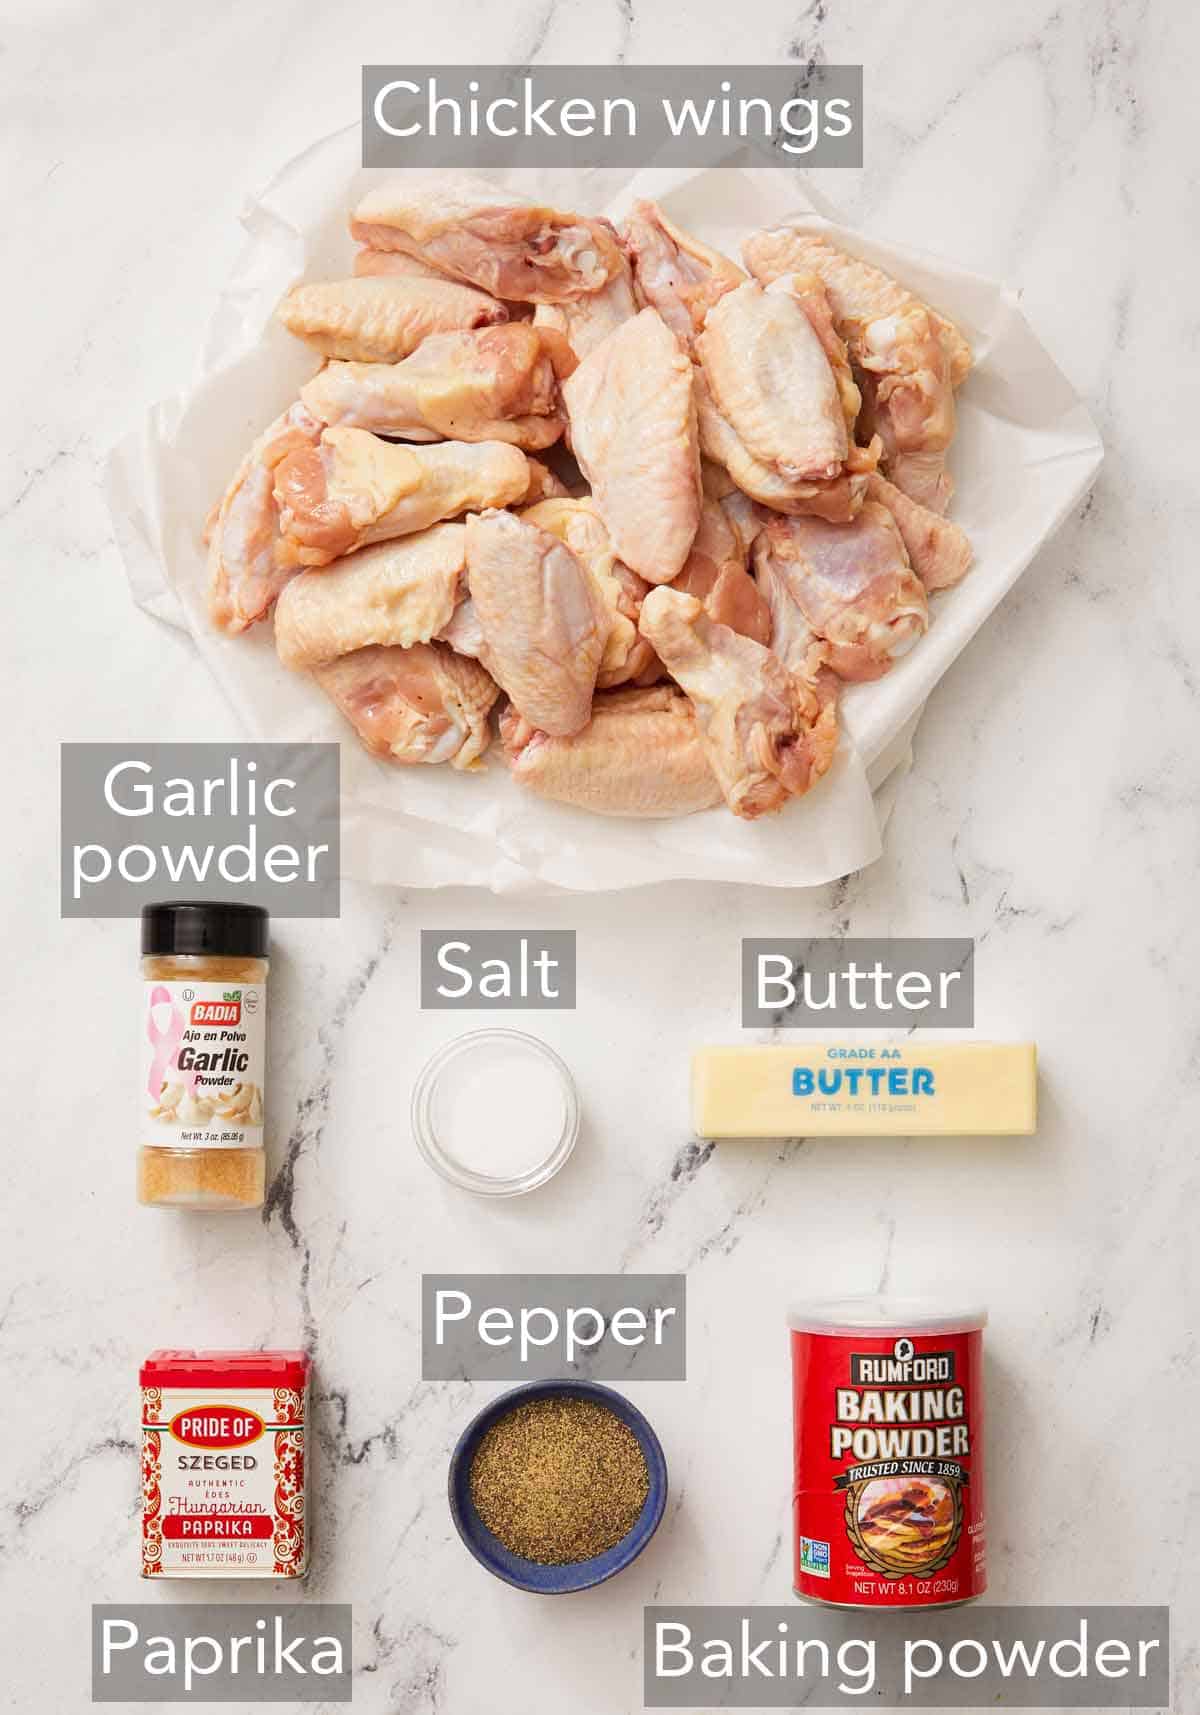 Ingredients needed to make chicken wings.